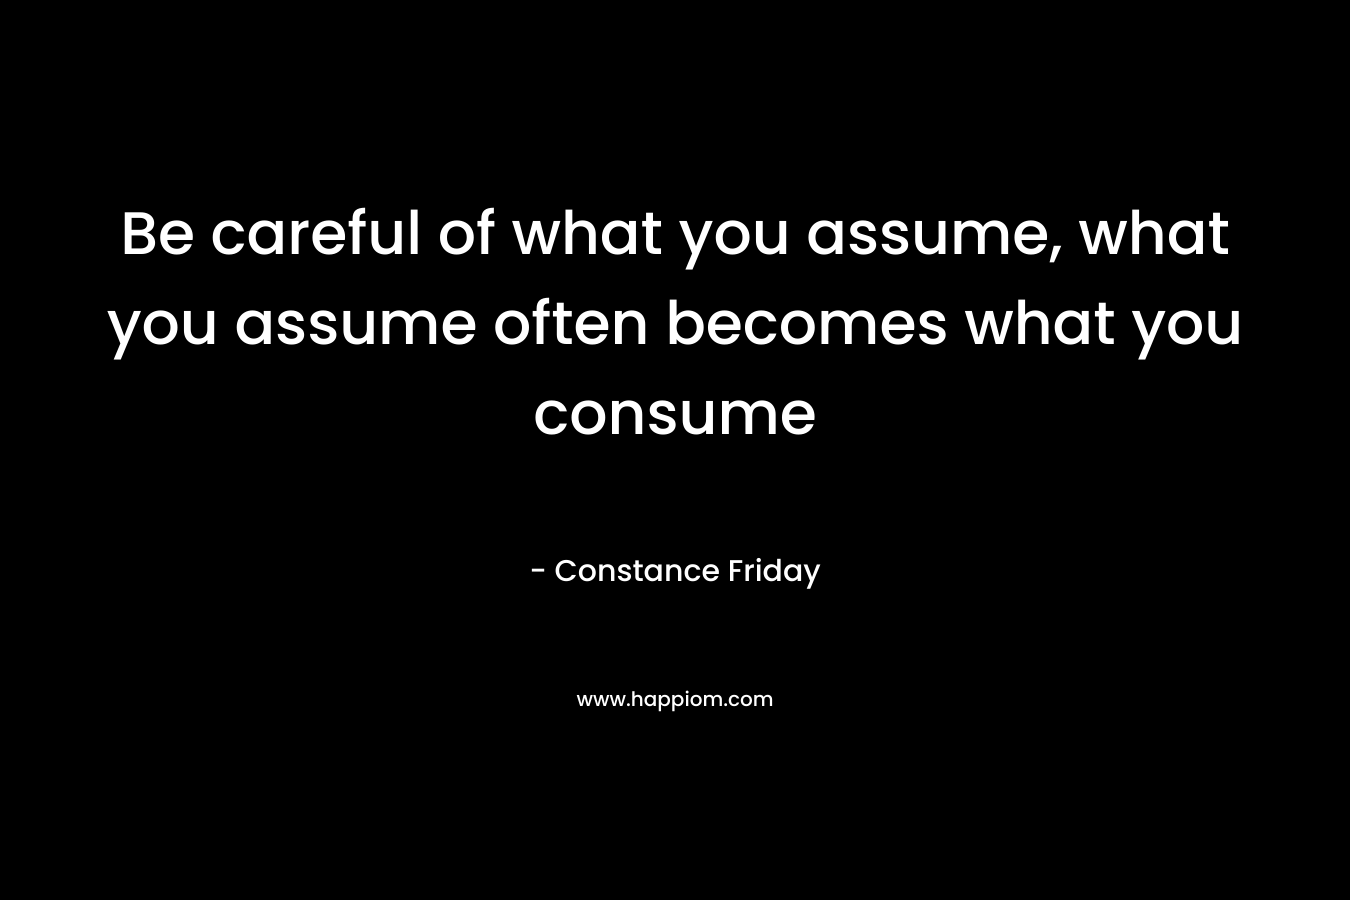 Be careful of what you assume, what you assume often becomes what you consume – Constance Friday